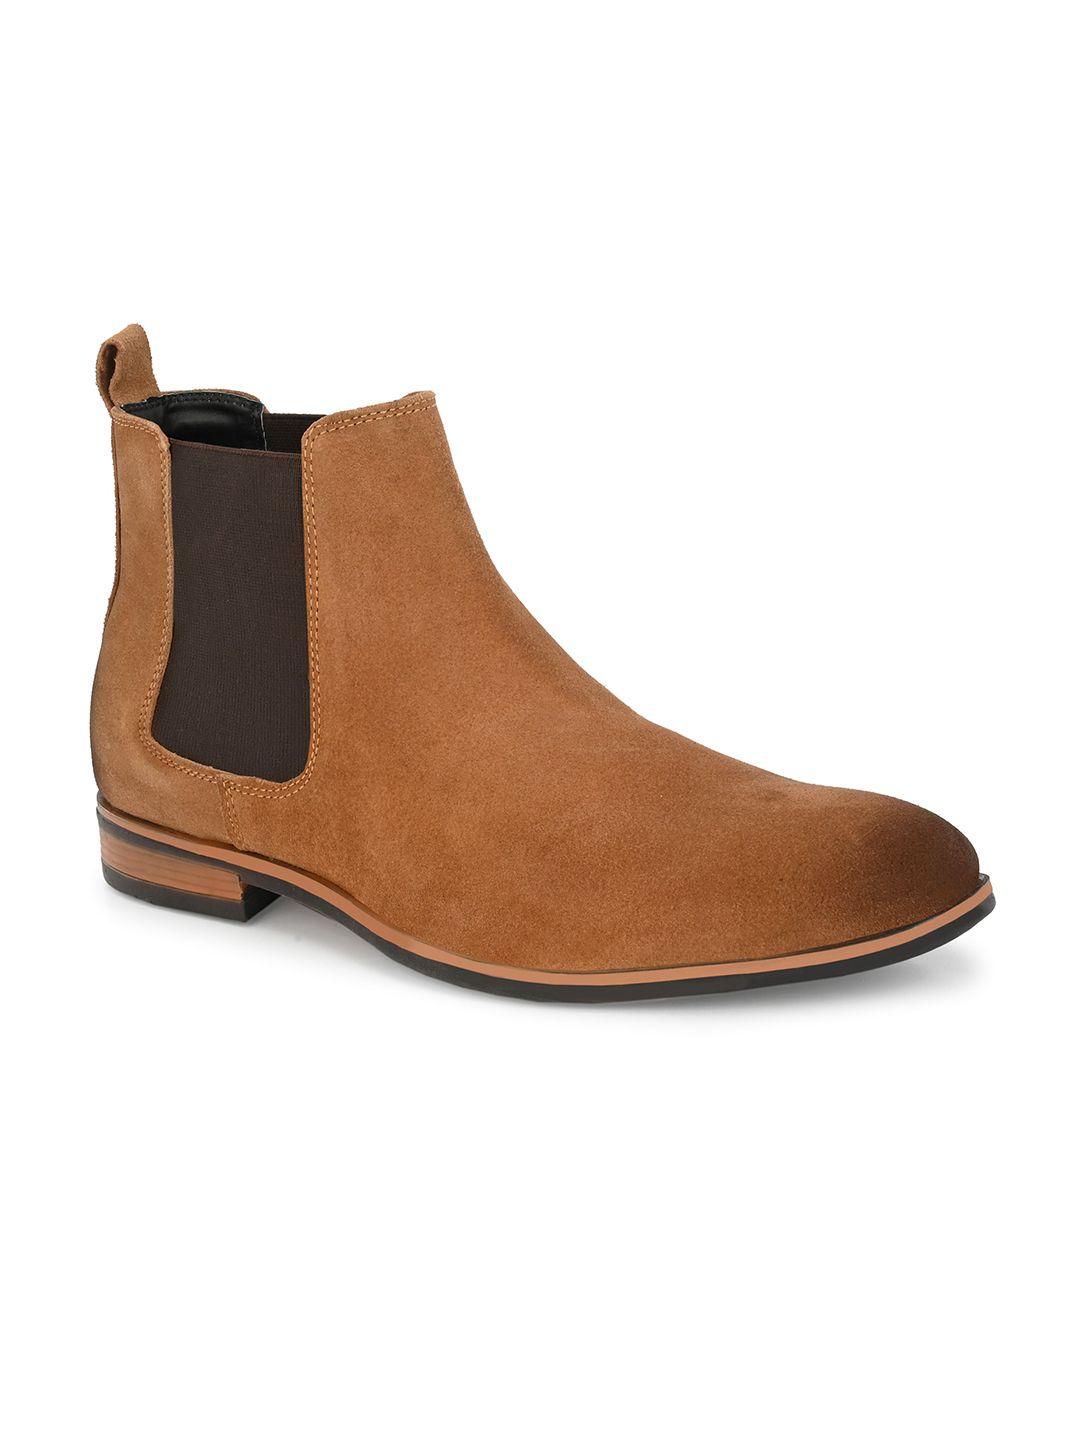 shences-men-mid-top-casual-suede-chelsea-boots